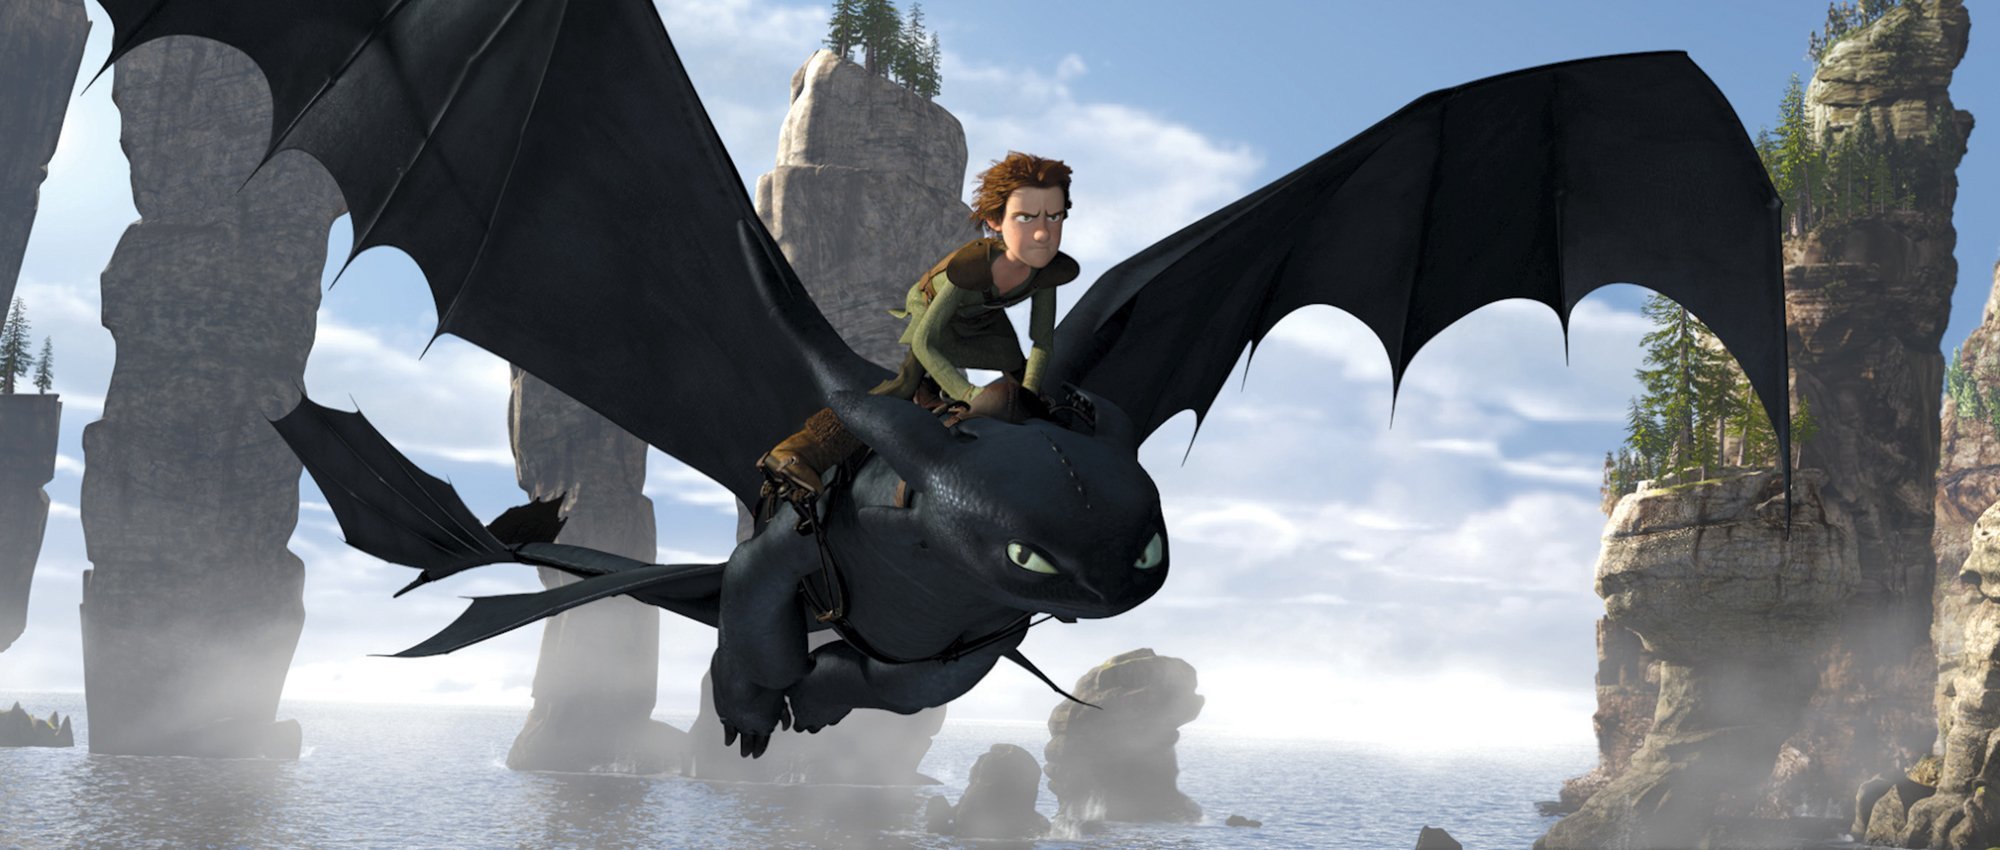 How to train your dragon wallpaper toothless 5 - High Definition